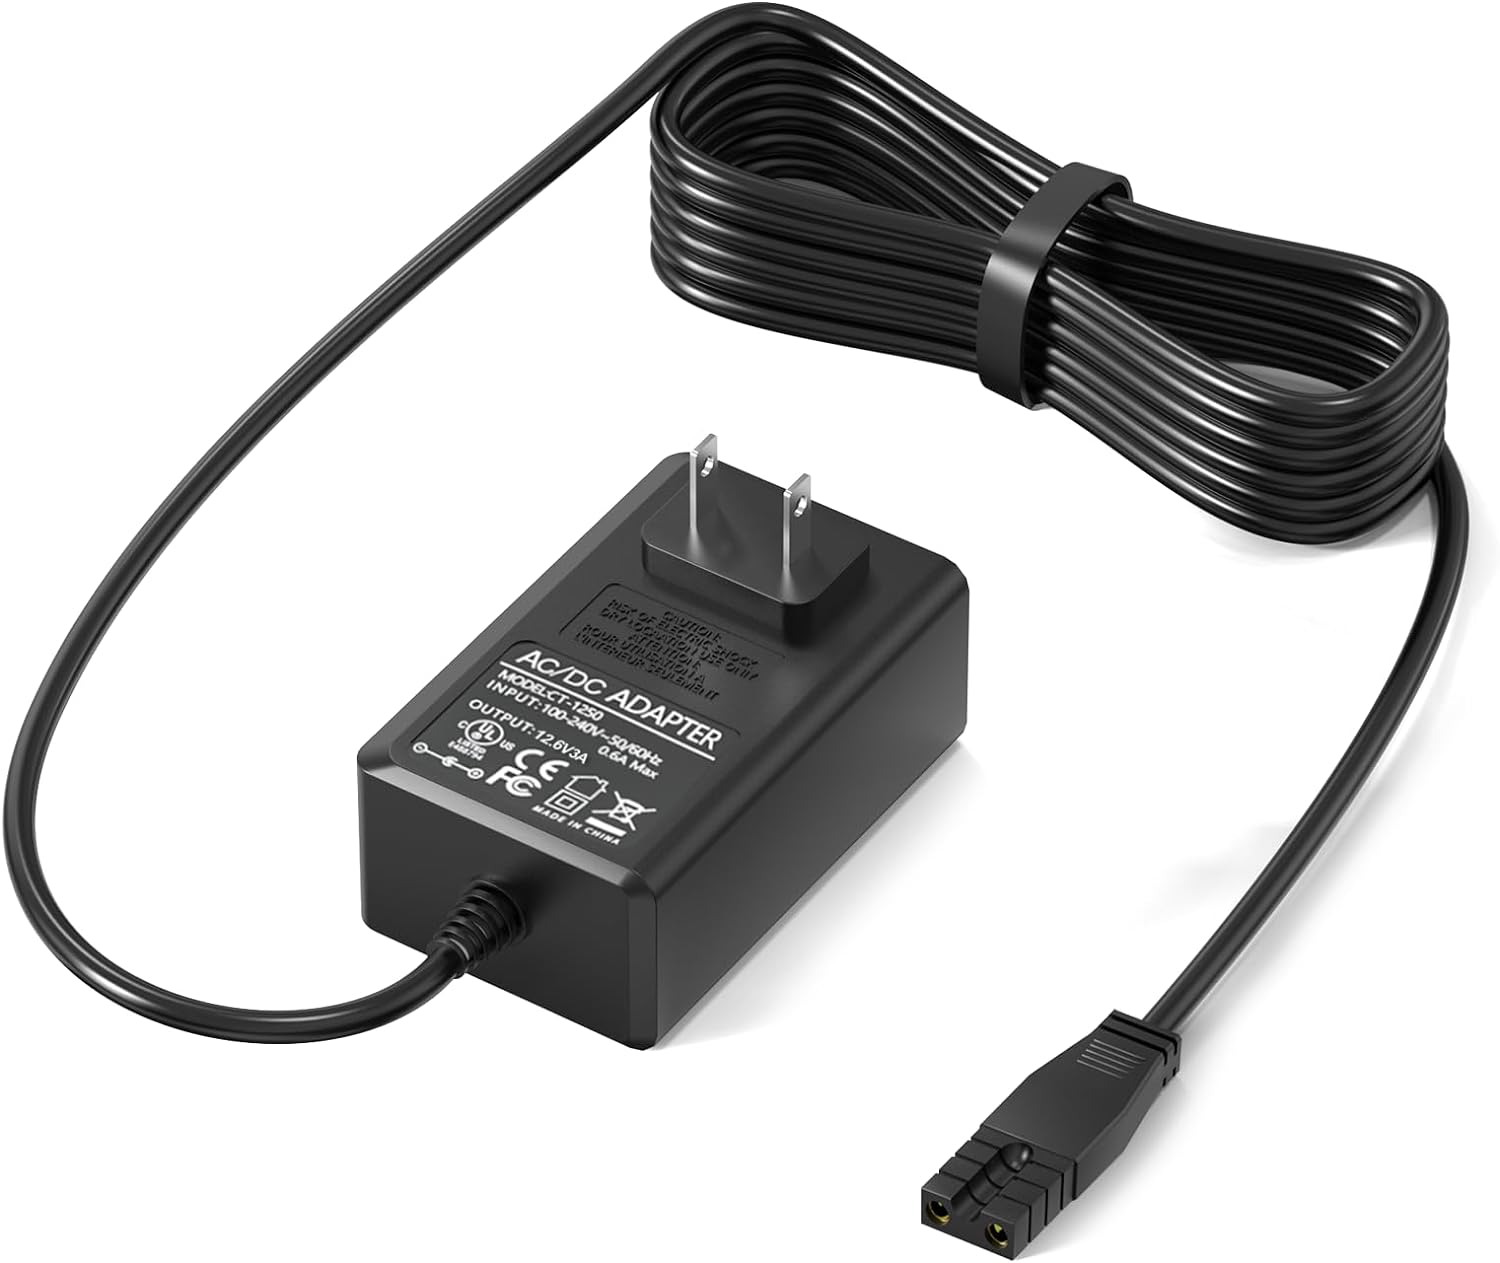 Replacement for WYBOT Osprey 700 Cordless Robotic Pool Cleaner Charger, 12.6V Charger for Osprey700 Connectivity Techno